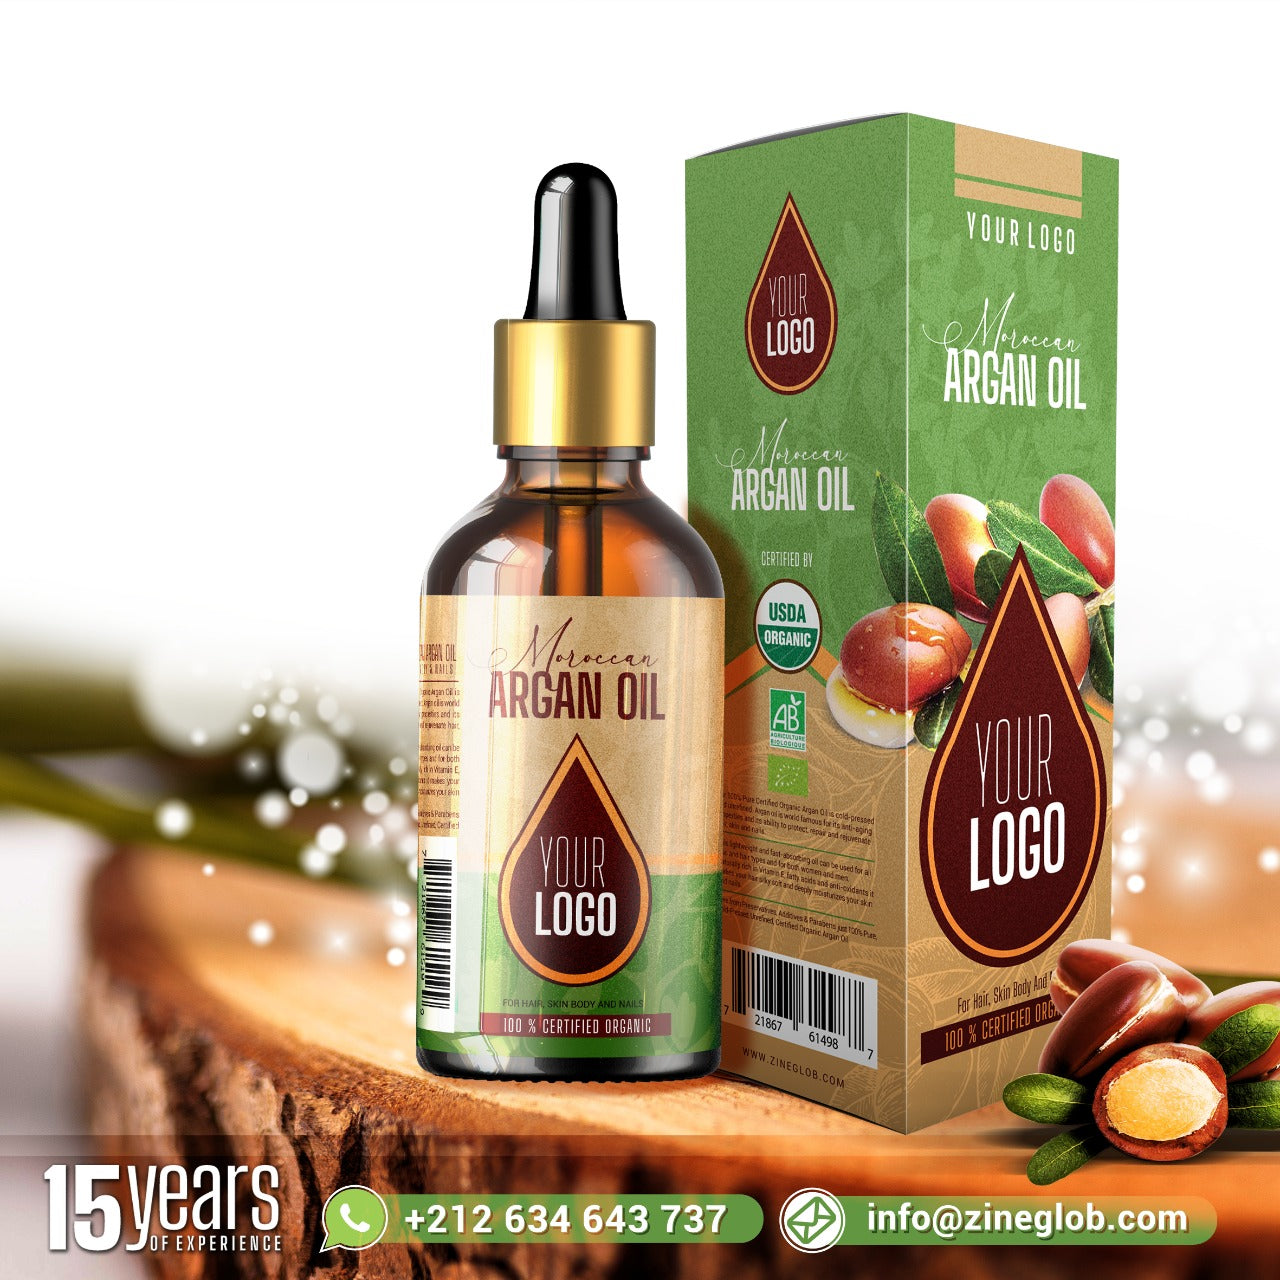 Production and marketing of Argan Oil private label and cosmetics